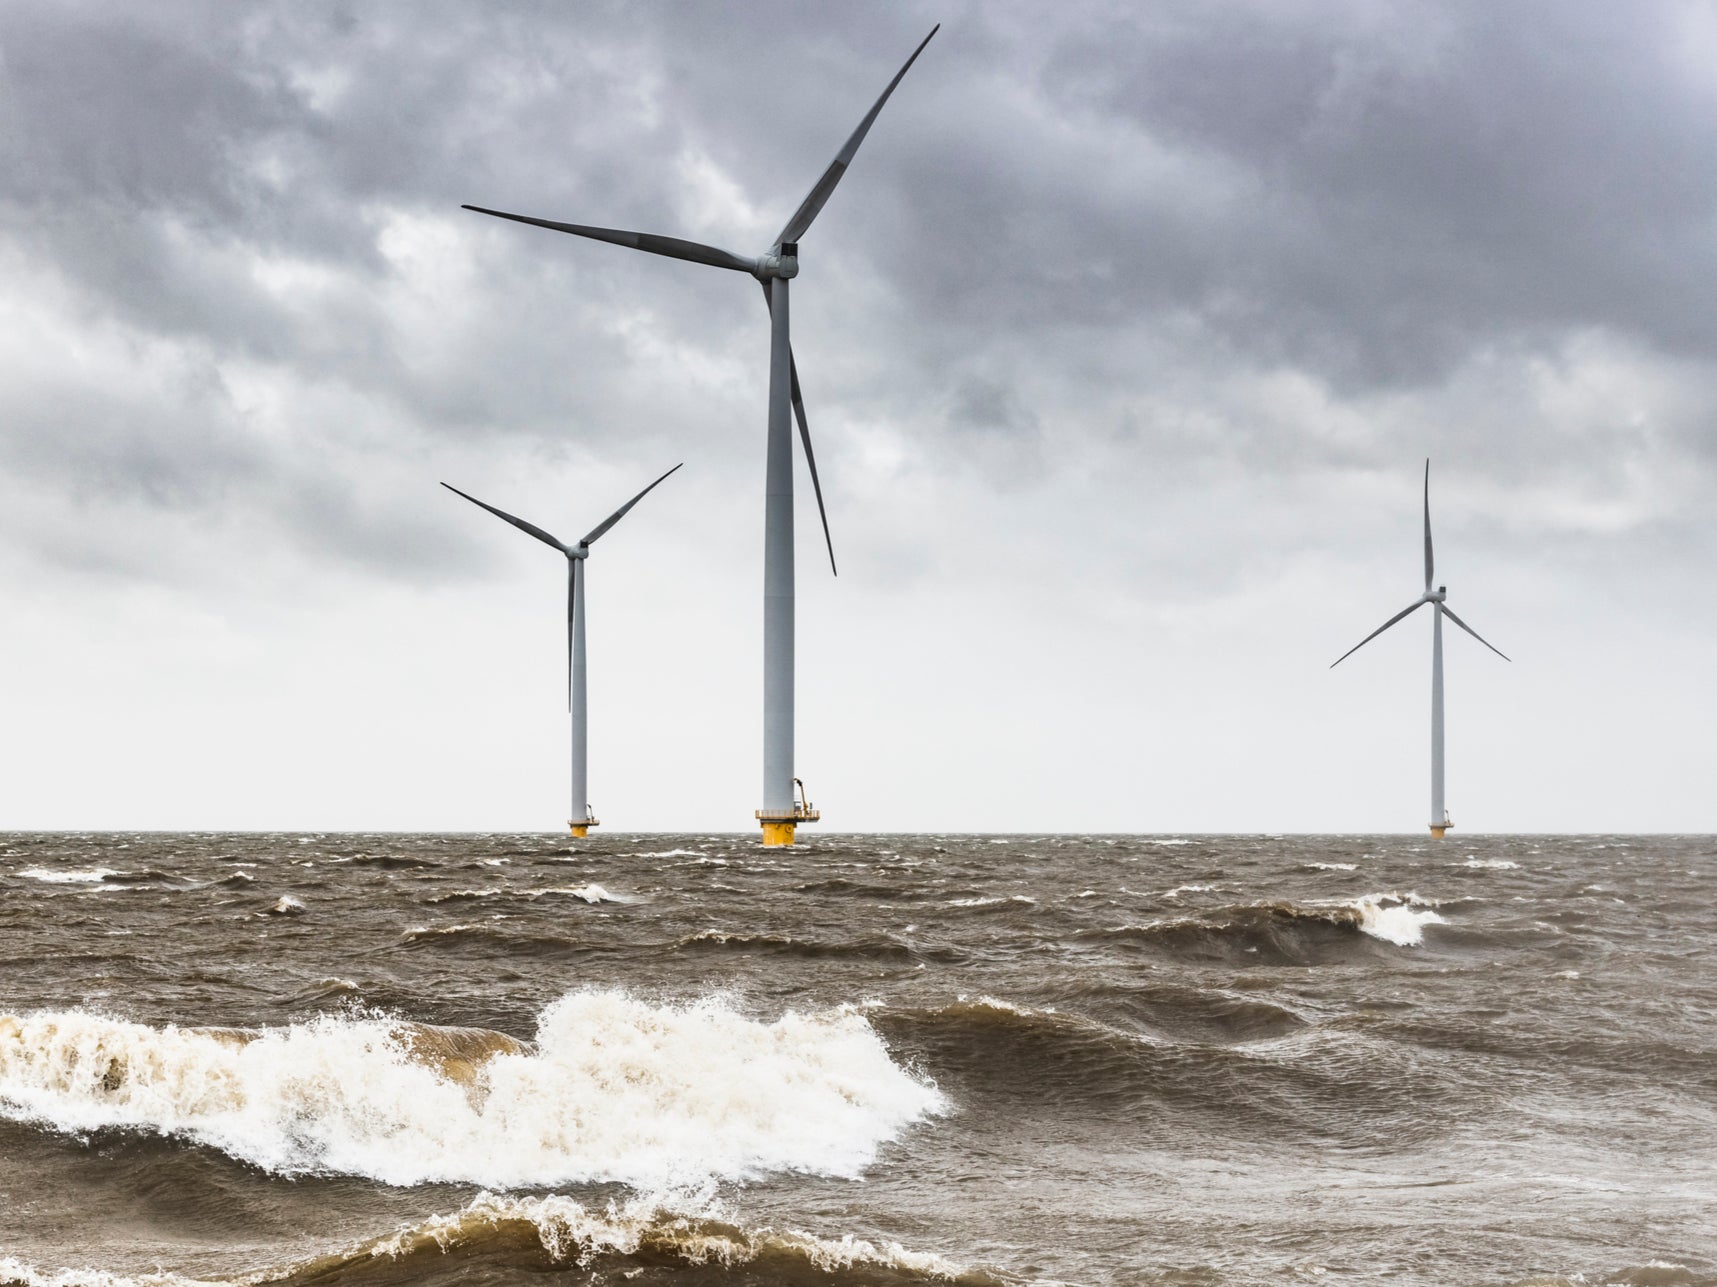 The UK’s turbine capacity will increase from 8-9MW this year to 14-15MW by 2025